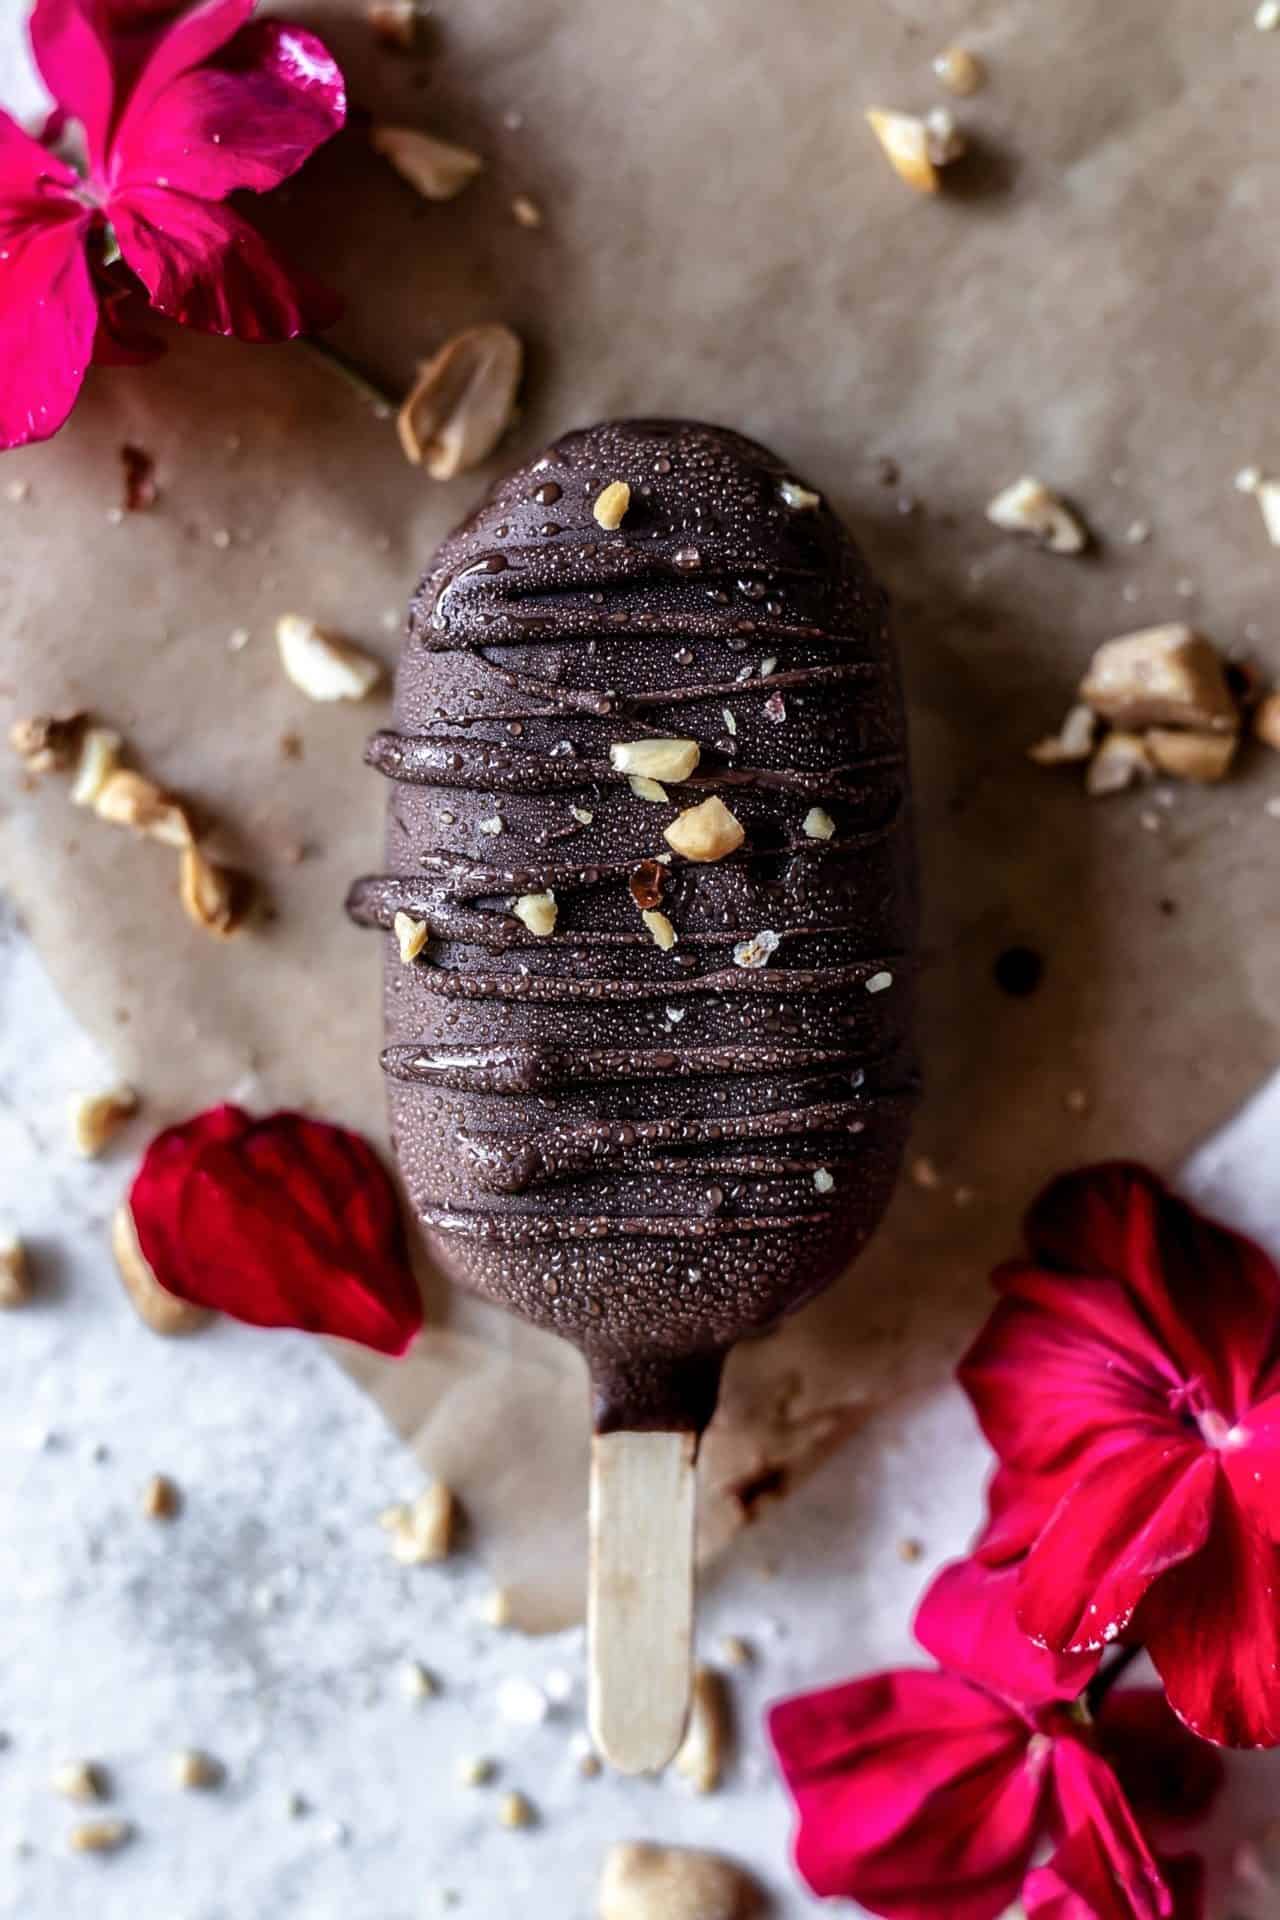 These Chocolate and Strawberry Vegan Magnum Ice Creams are super chocolaty, creamy, healthy, tummy-friendly and so delicious!